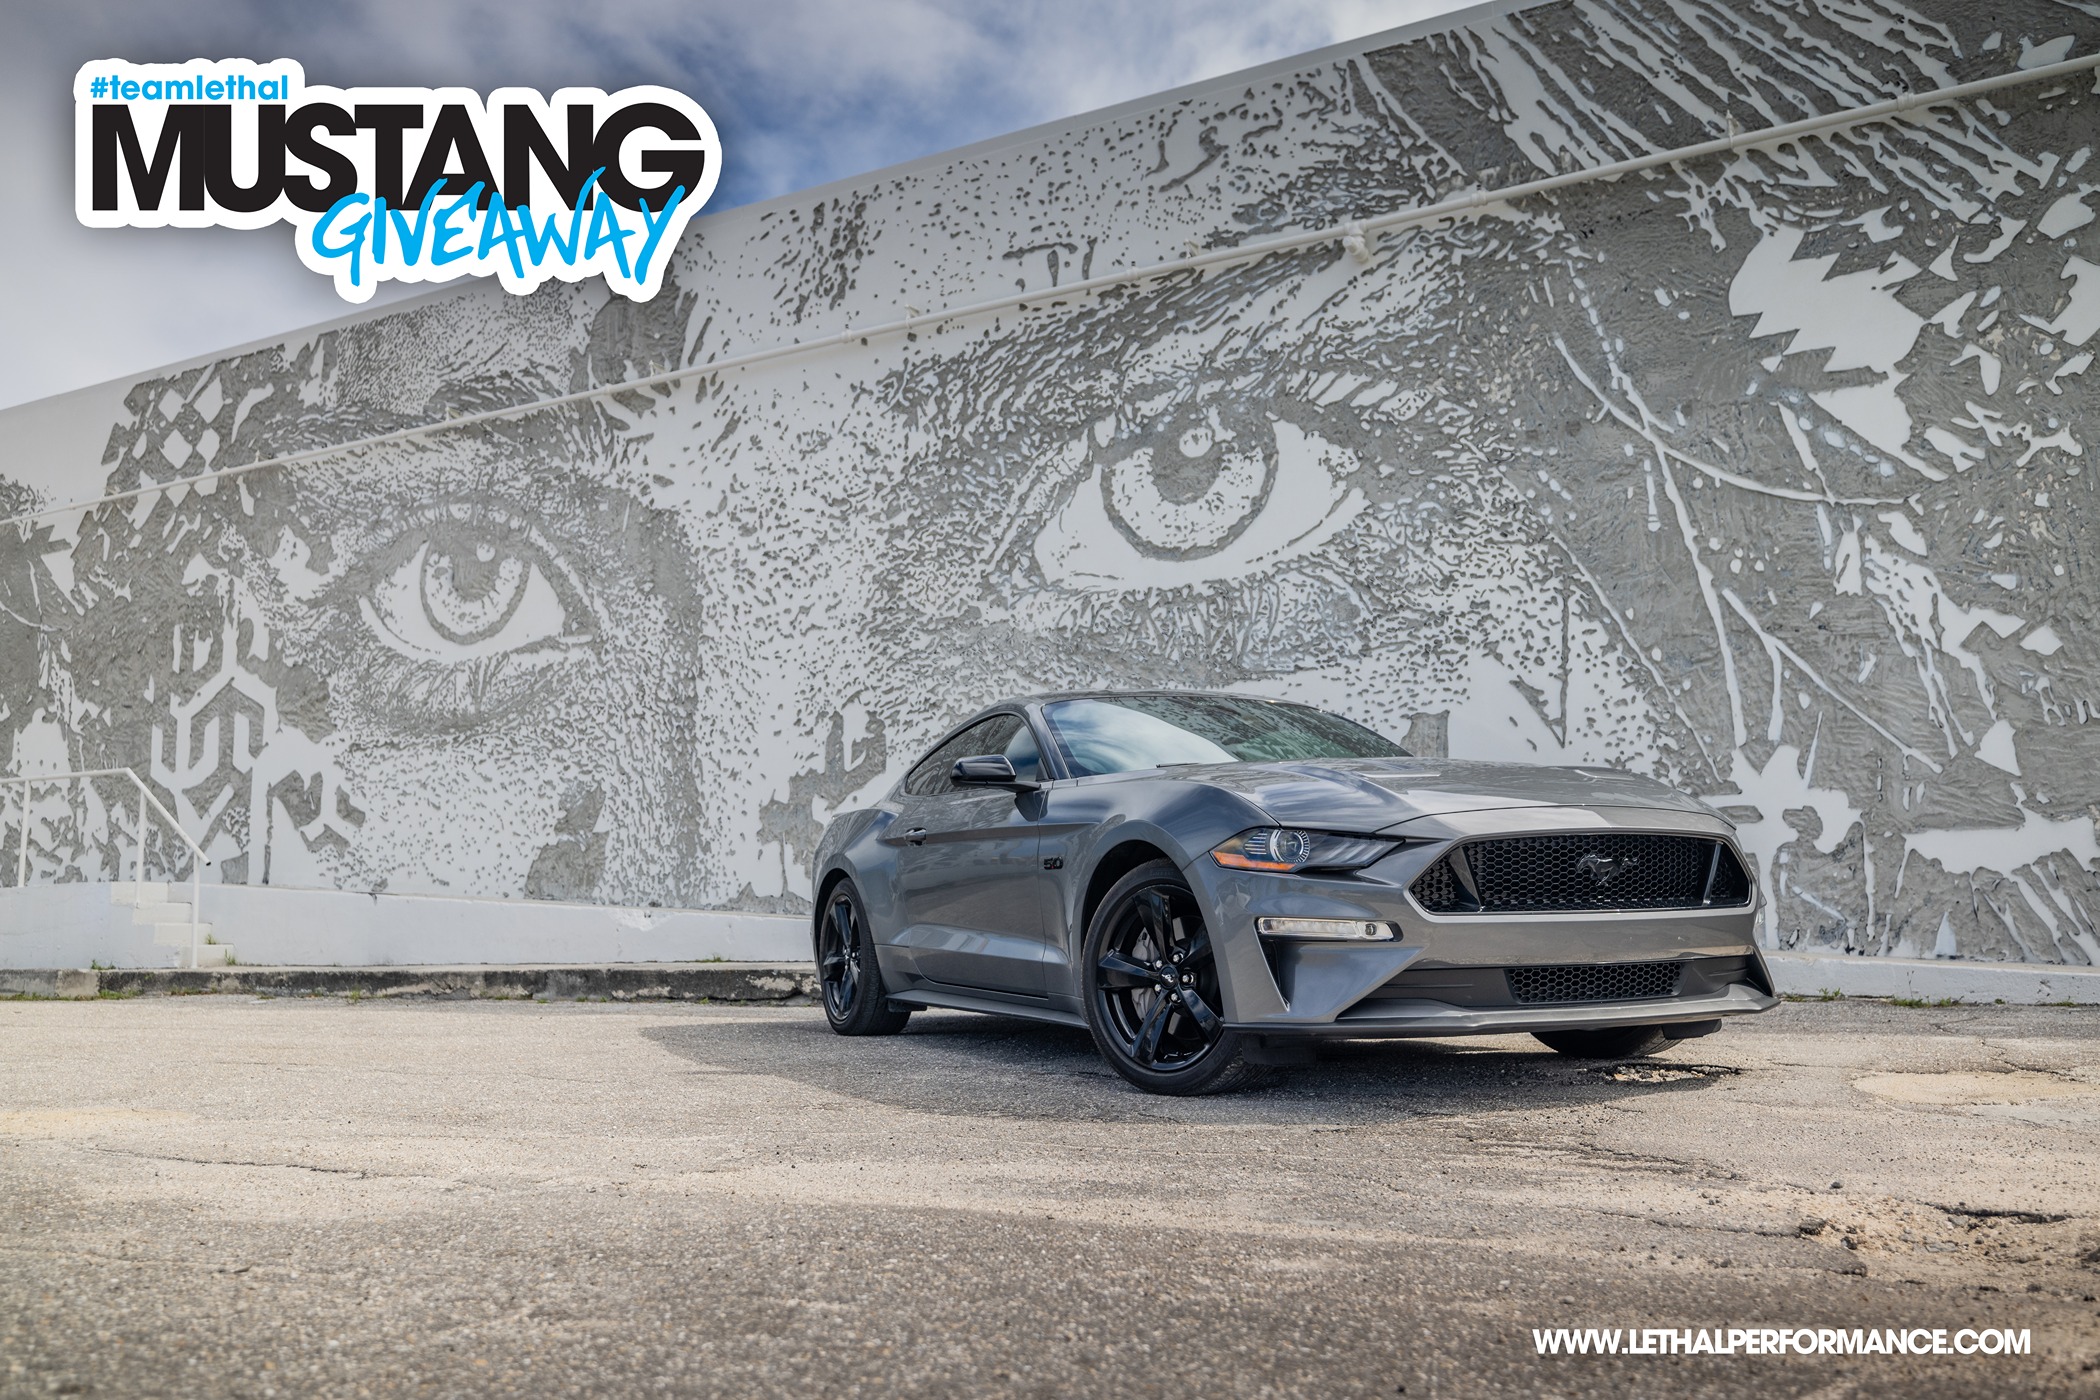 S650 Mustang #TEAMLETHAL MUSTANG GIVEAWAY IS LIVE!!! 3J3A1004